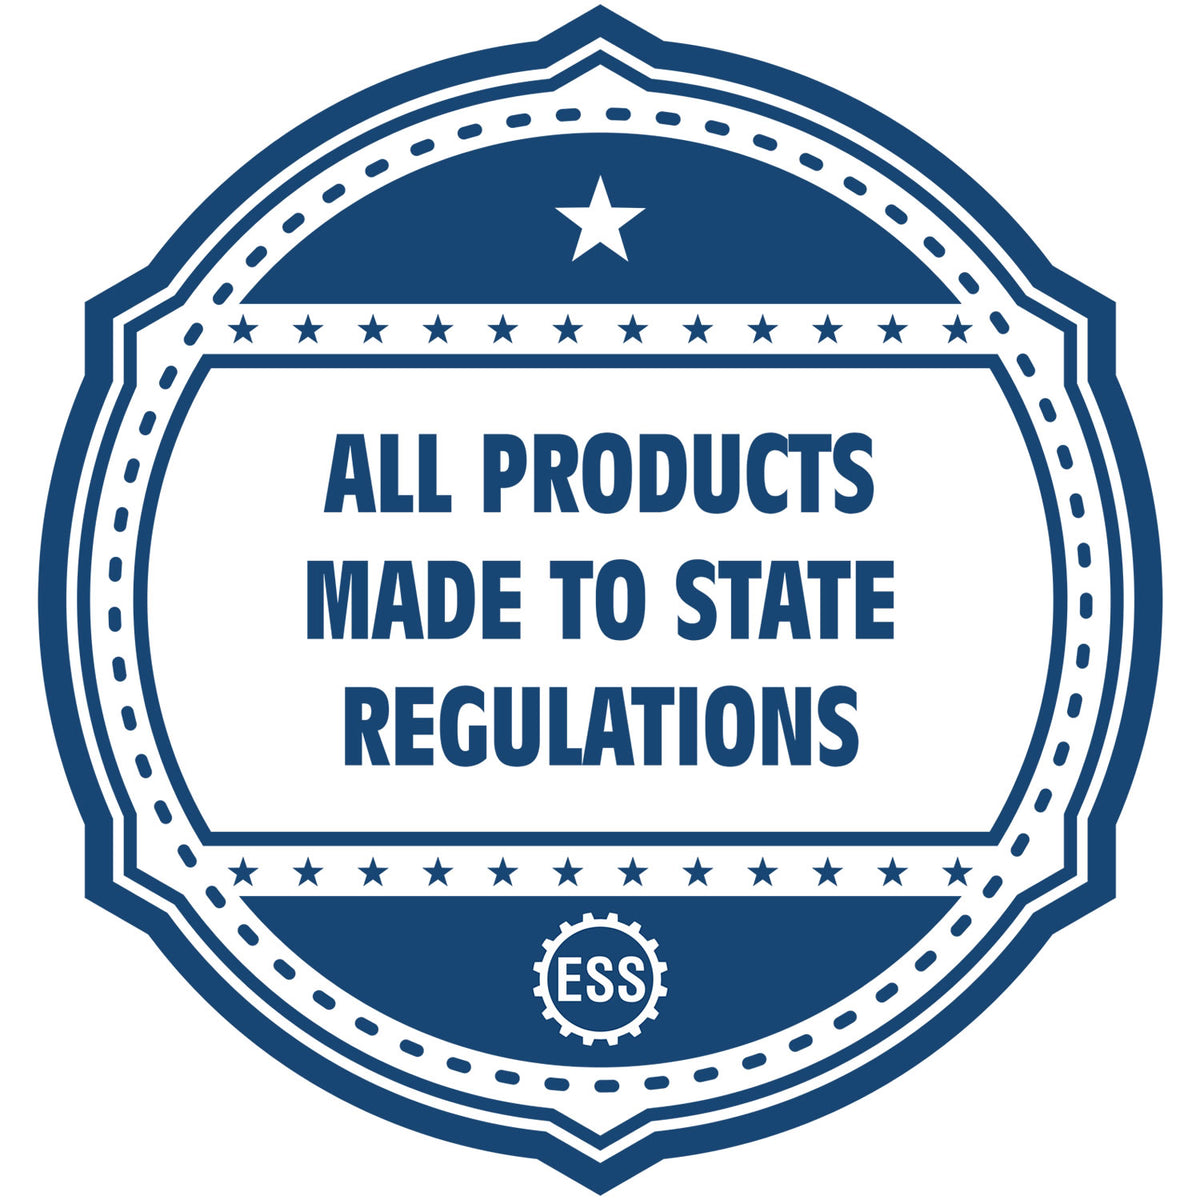 An icon or badge element for the Self-Inking Rectangular Maryland Notary Stamp showing that this product is made in compliance with state regulations.